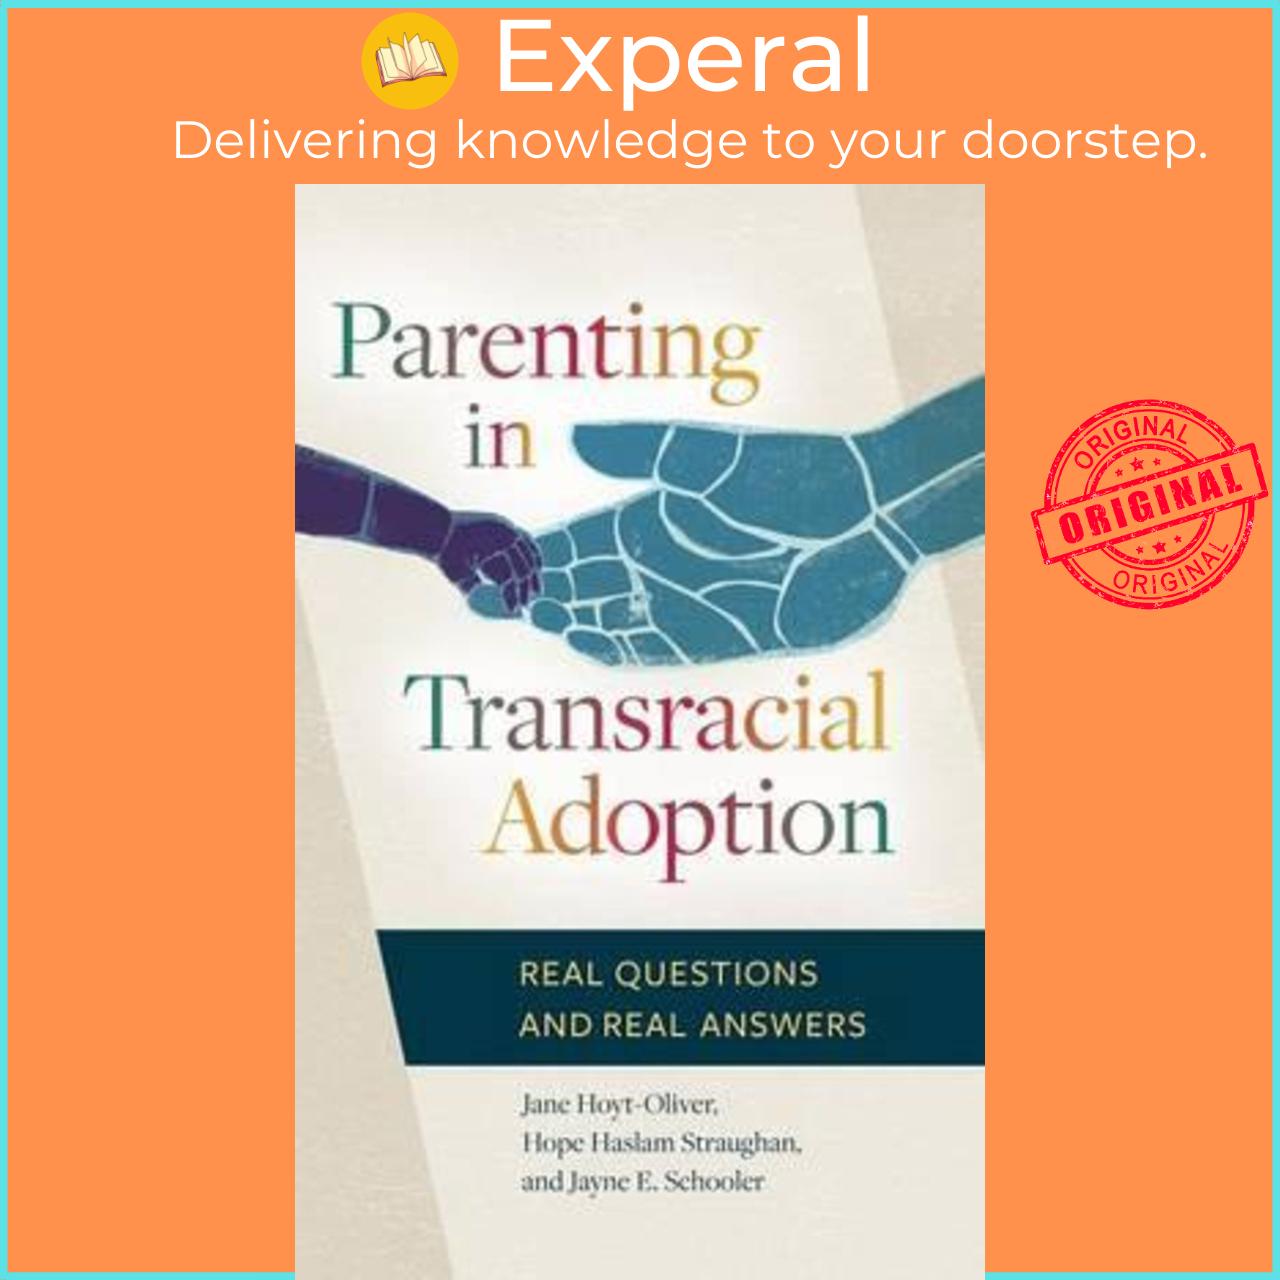 Sách - Parenting in Transracial Adoption : Real Questions and Real Answers by Jane Hoyt-Oliver (US edition, hardcover)